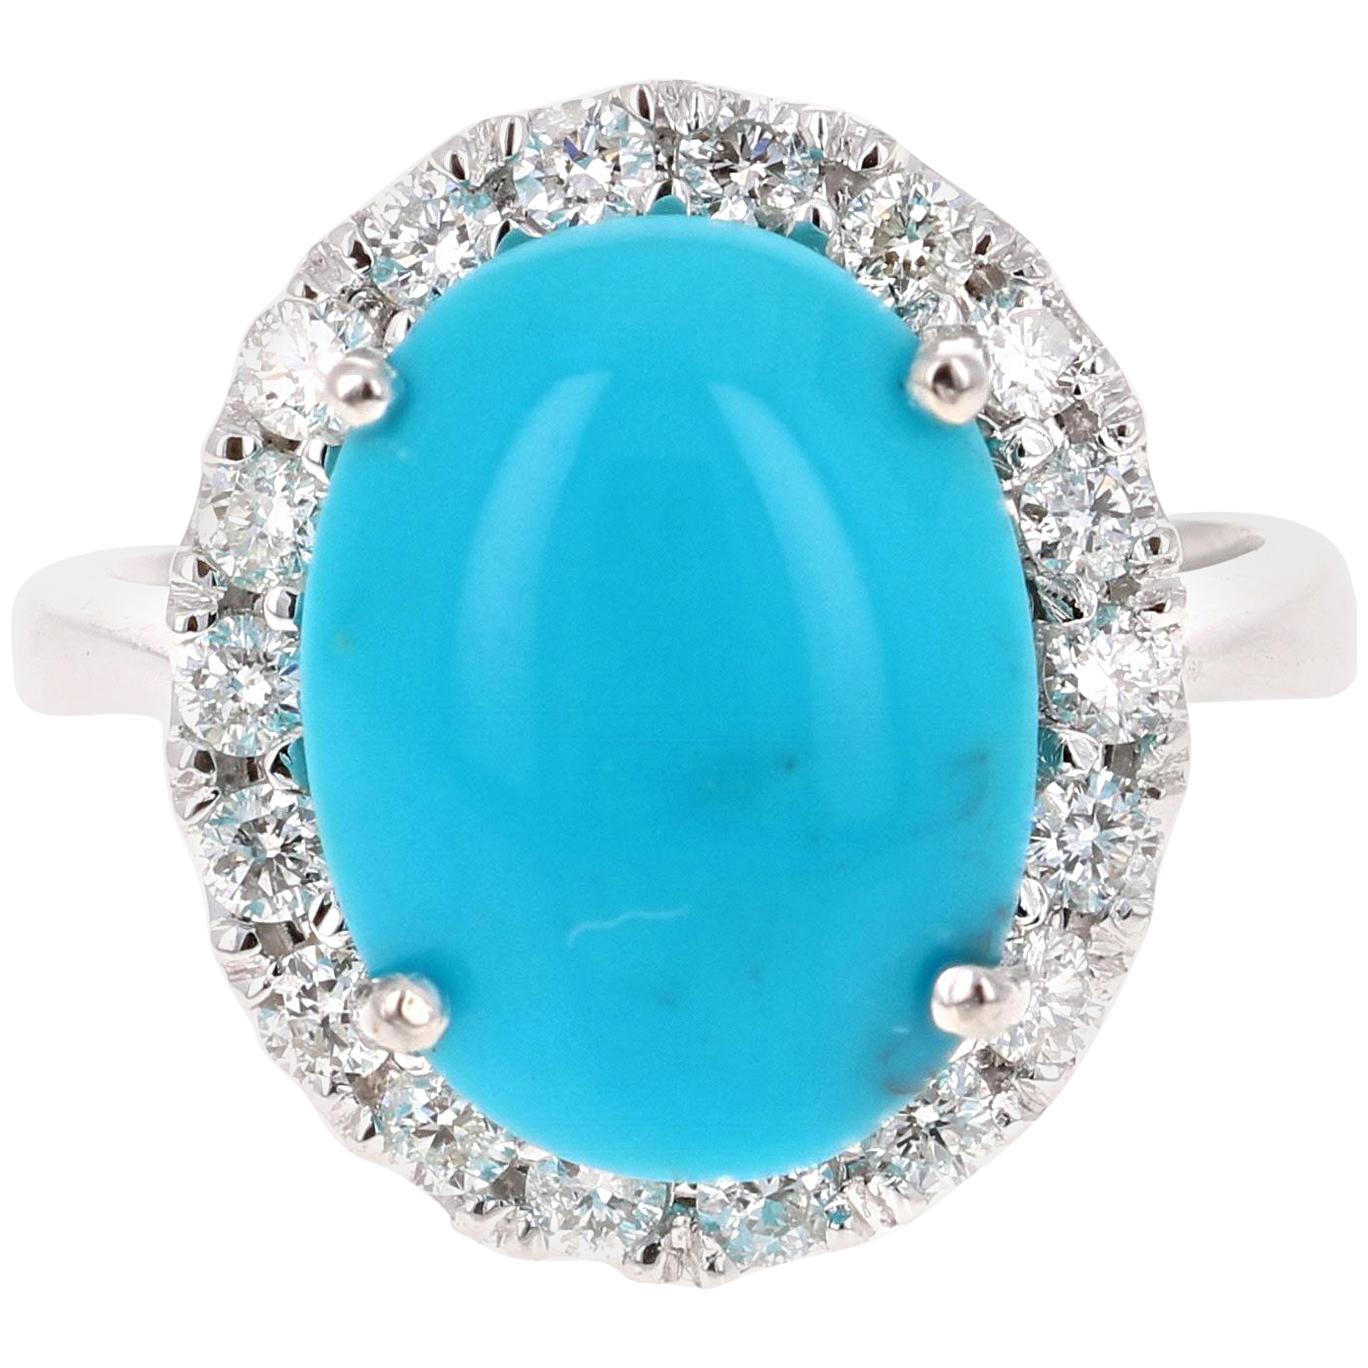 7.28 Carat Oval Cut Turquoise Diamond White Gold Cocktail Ring